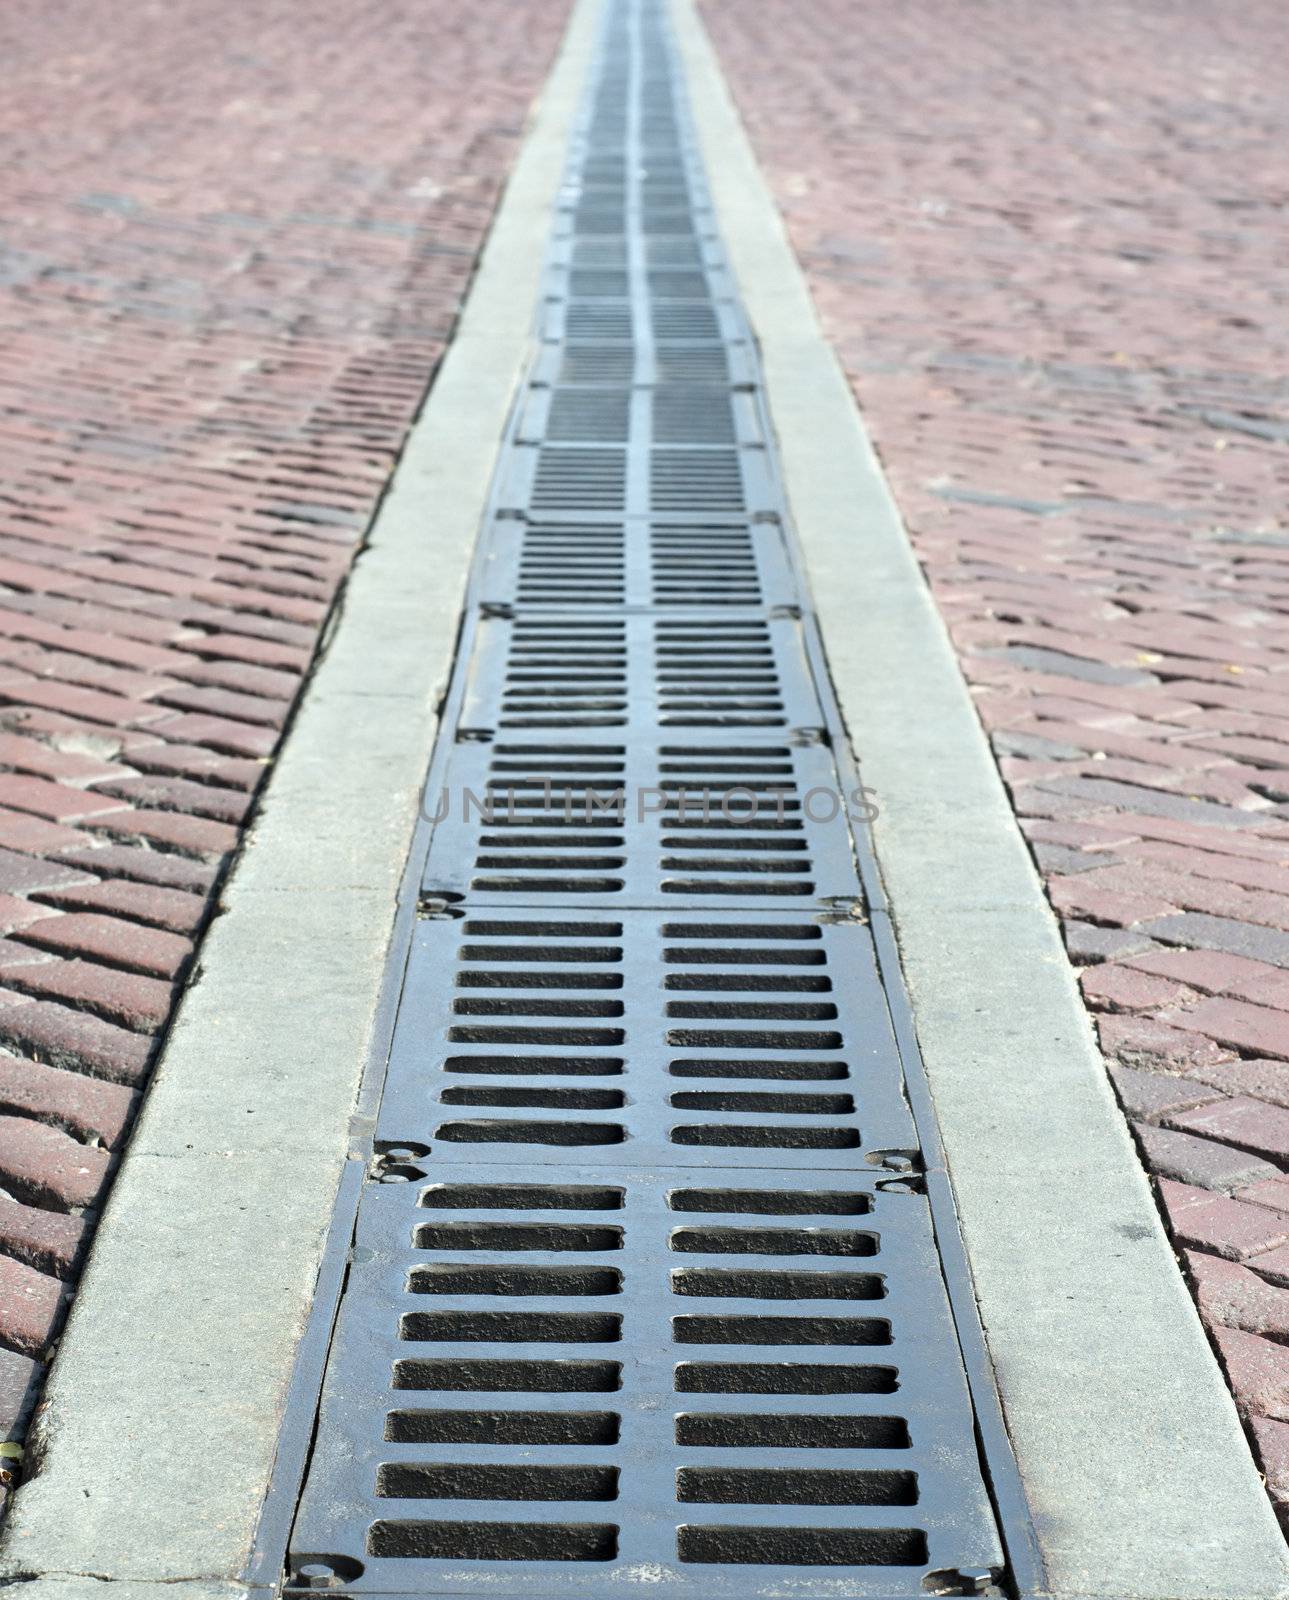 a brick road abtract blur with a metal grate drain down the center